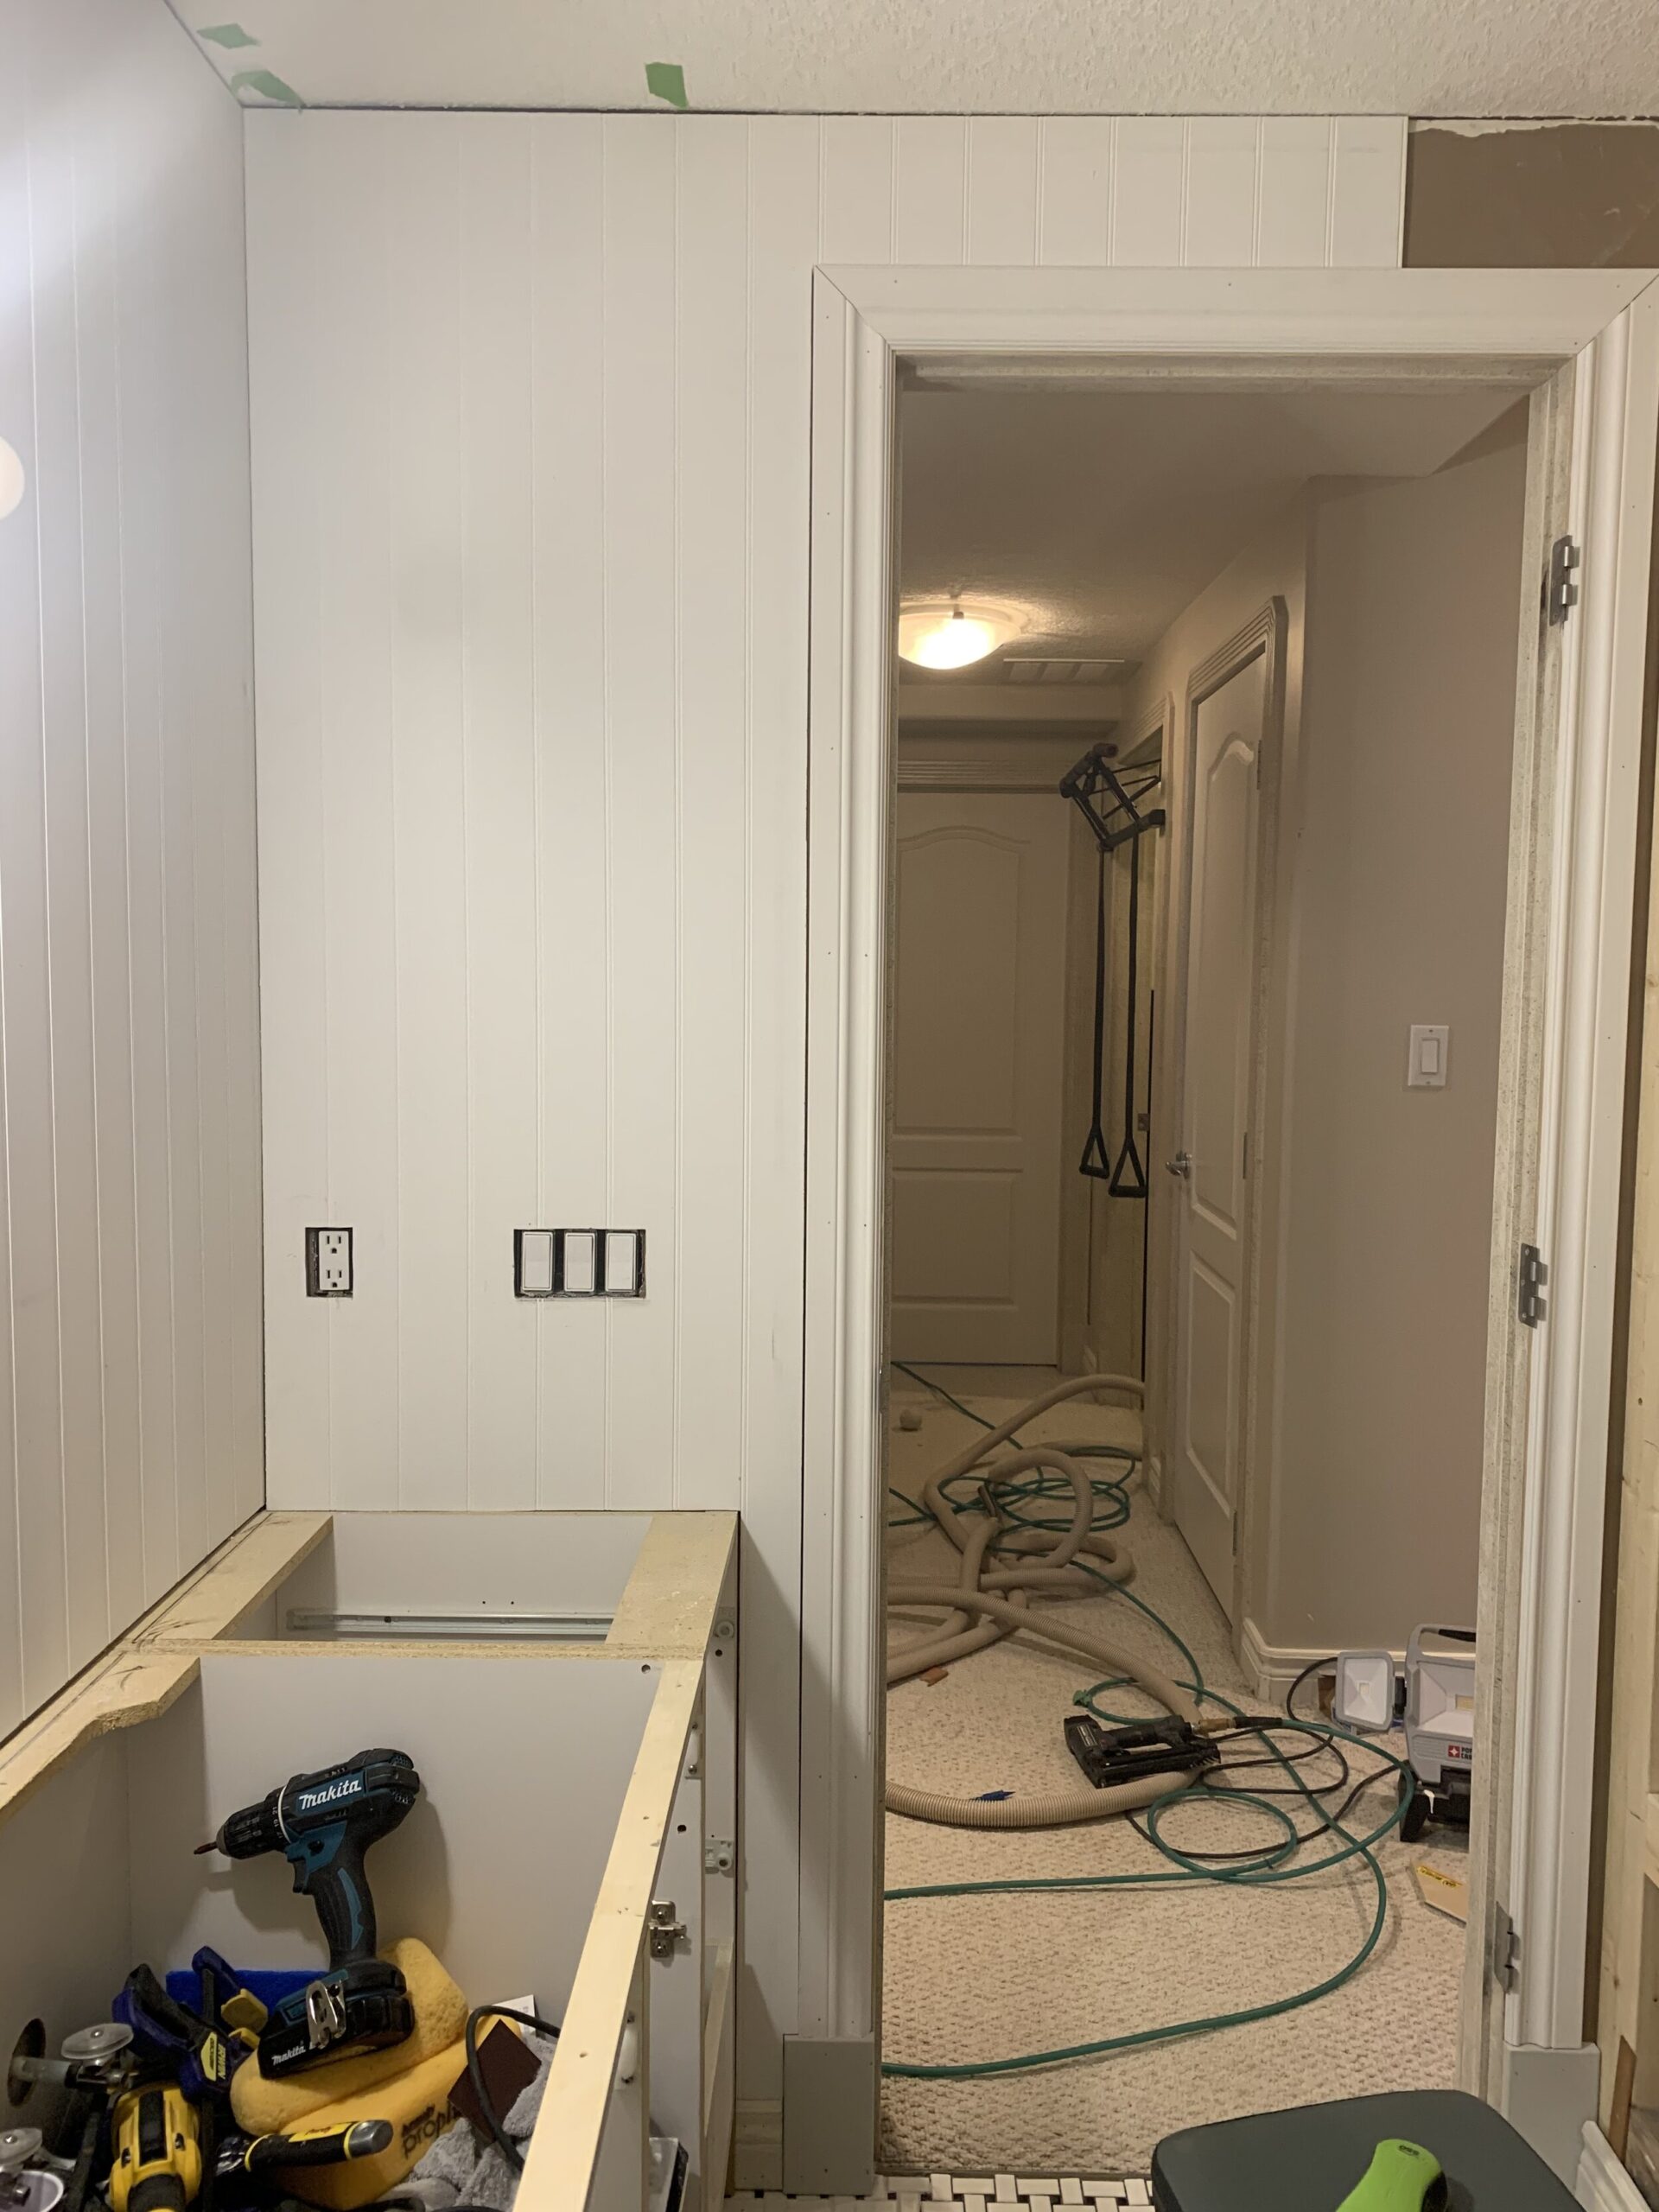 installing beadboard panelling that was cut out around door and vanity in place and fitting well